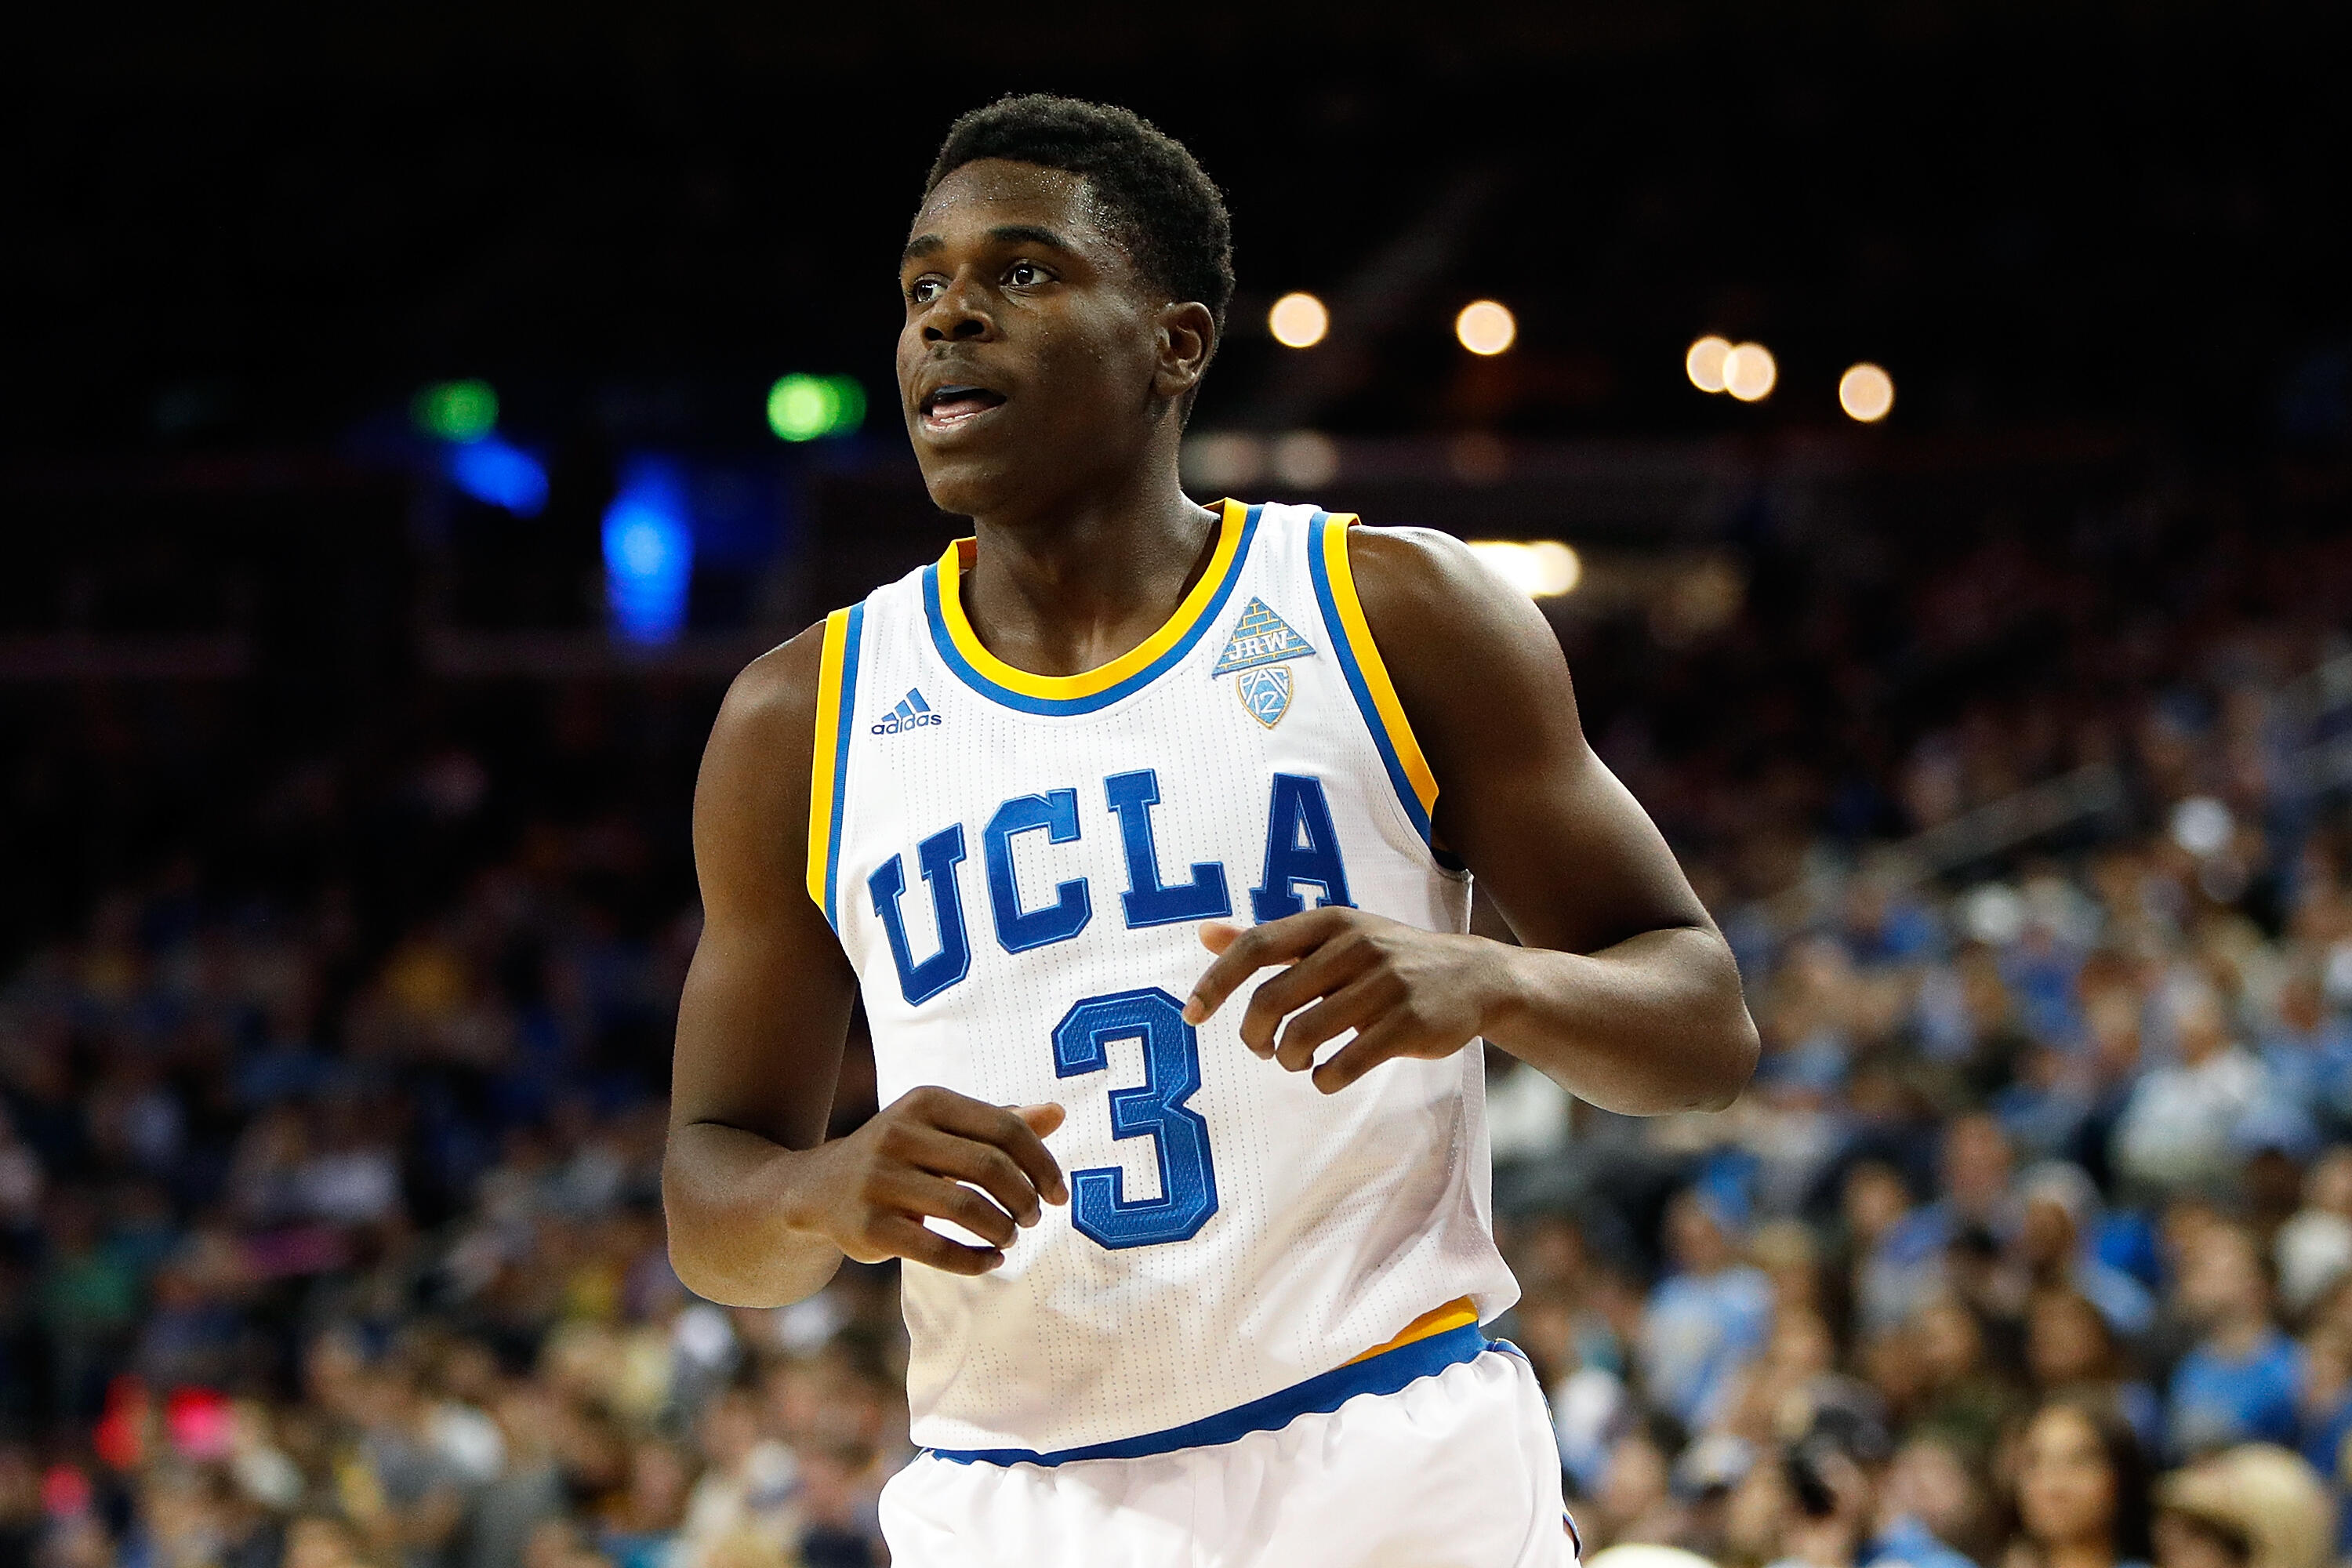 LOS ANGELES, CA - JANUARY 08:  Aaron Holiday #3 of the UCLA Bruins is seen during the game against the Standford Cardinal at Pauley Pavilion on January 8, 2017 in Los Angeles, California.  (Photo by Josh Lefkowitz/Getty Images)